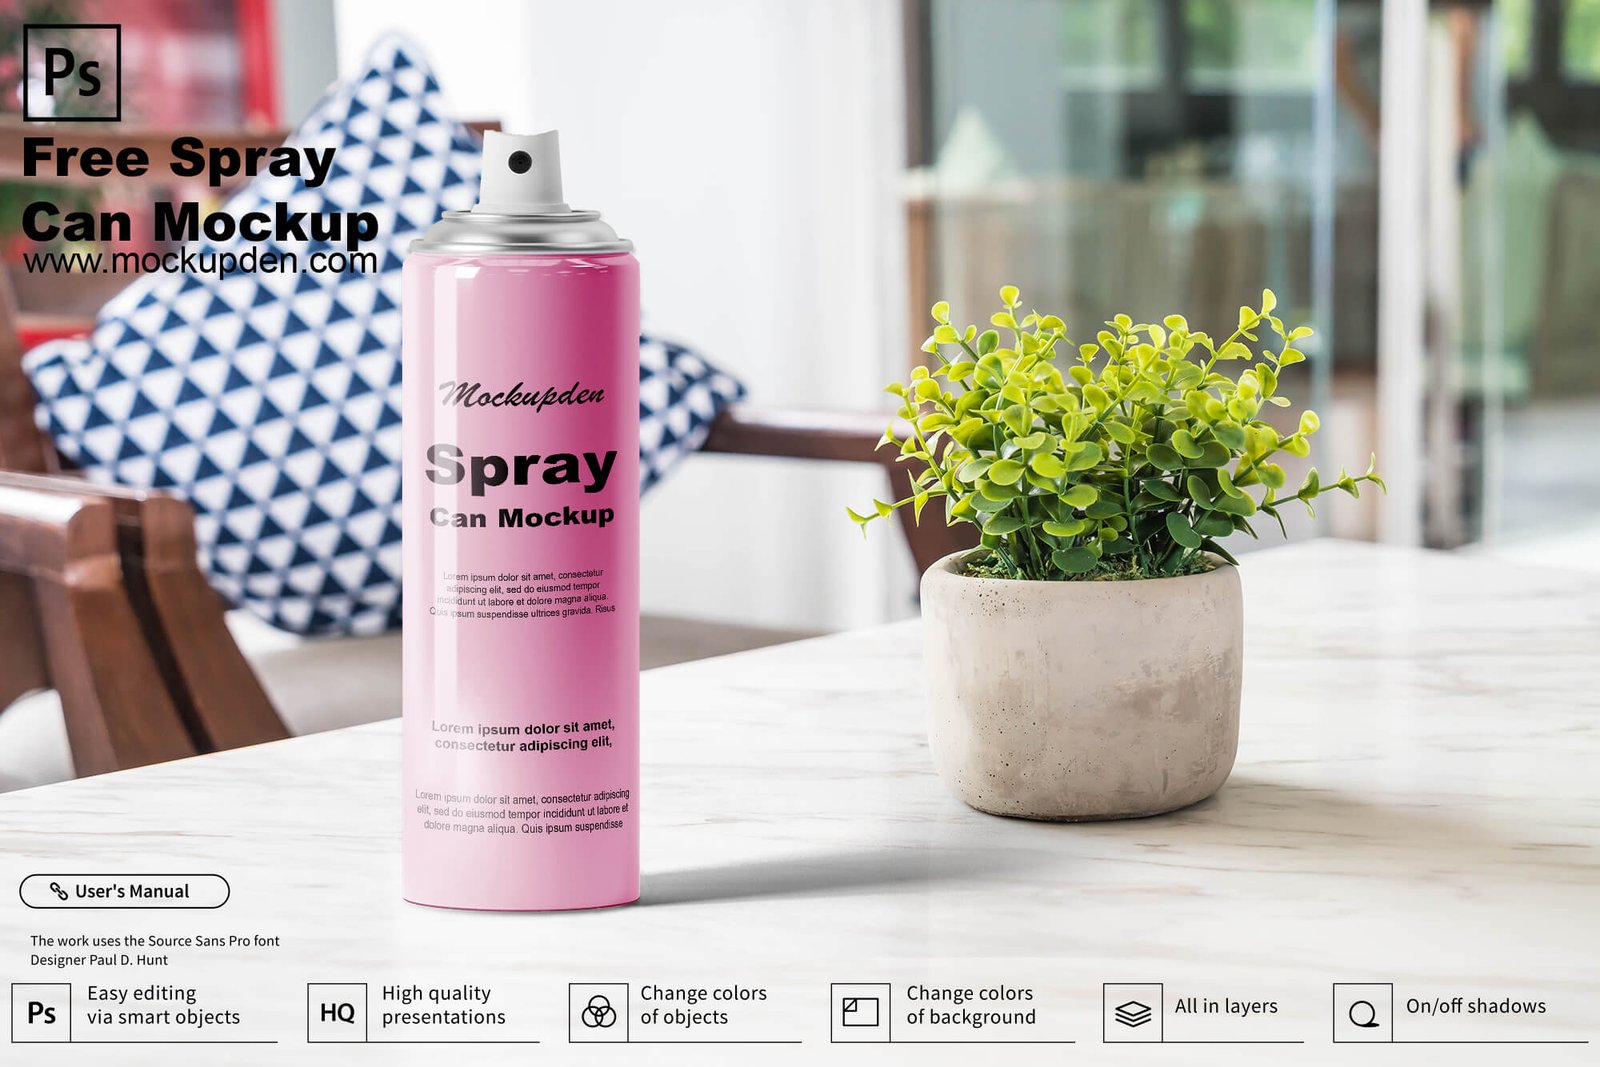 Download Free Spray Can Mockup PSD Template - Mockup Den